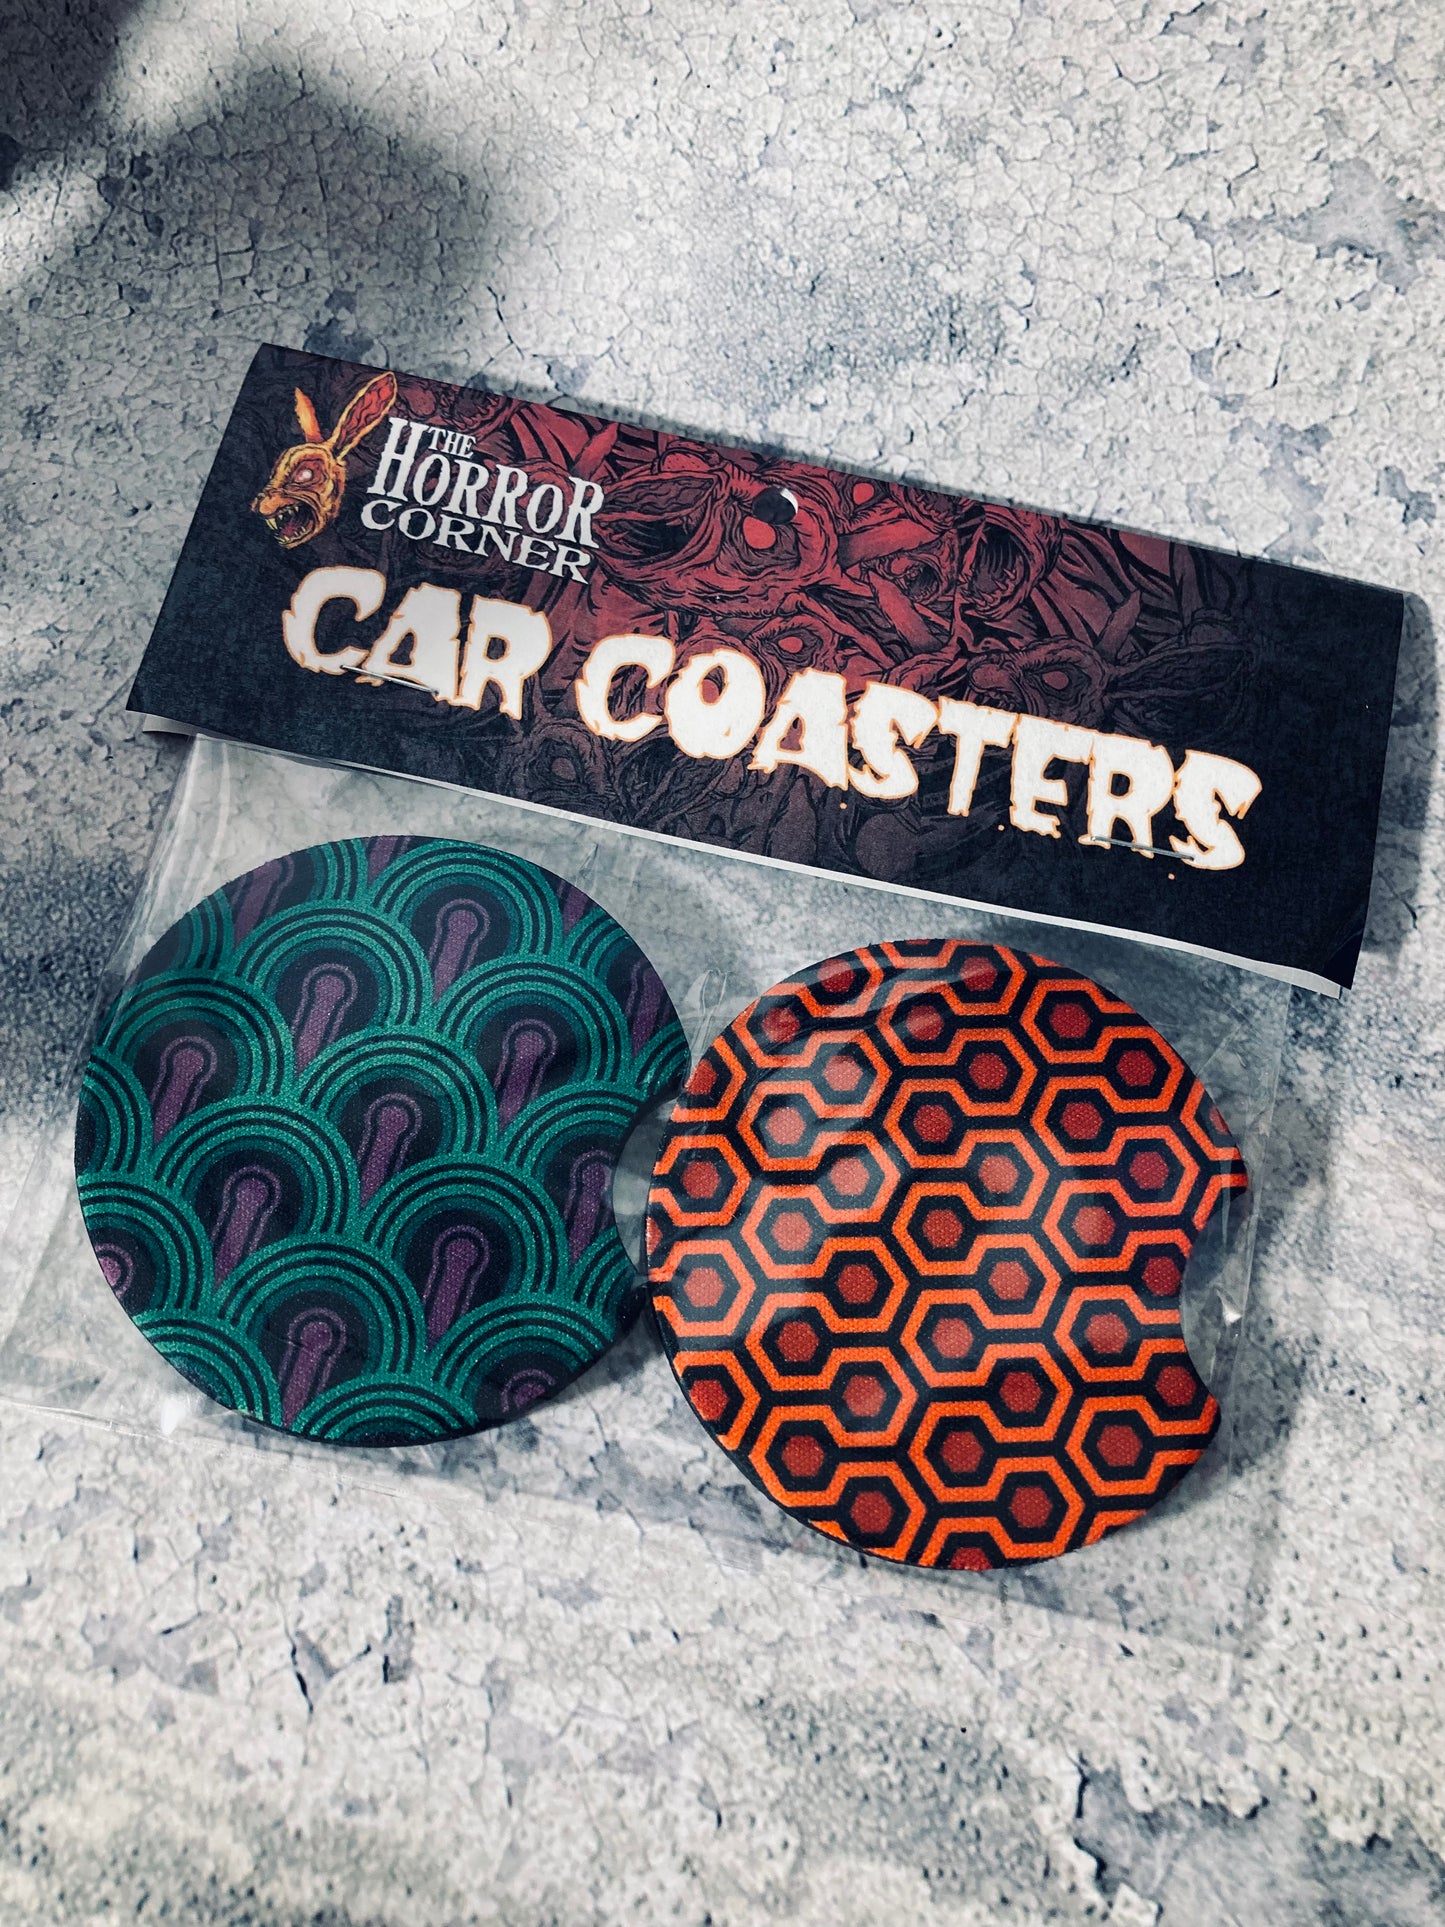 The Shining car coaster pack